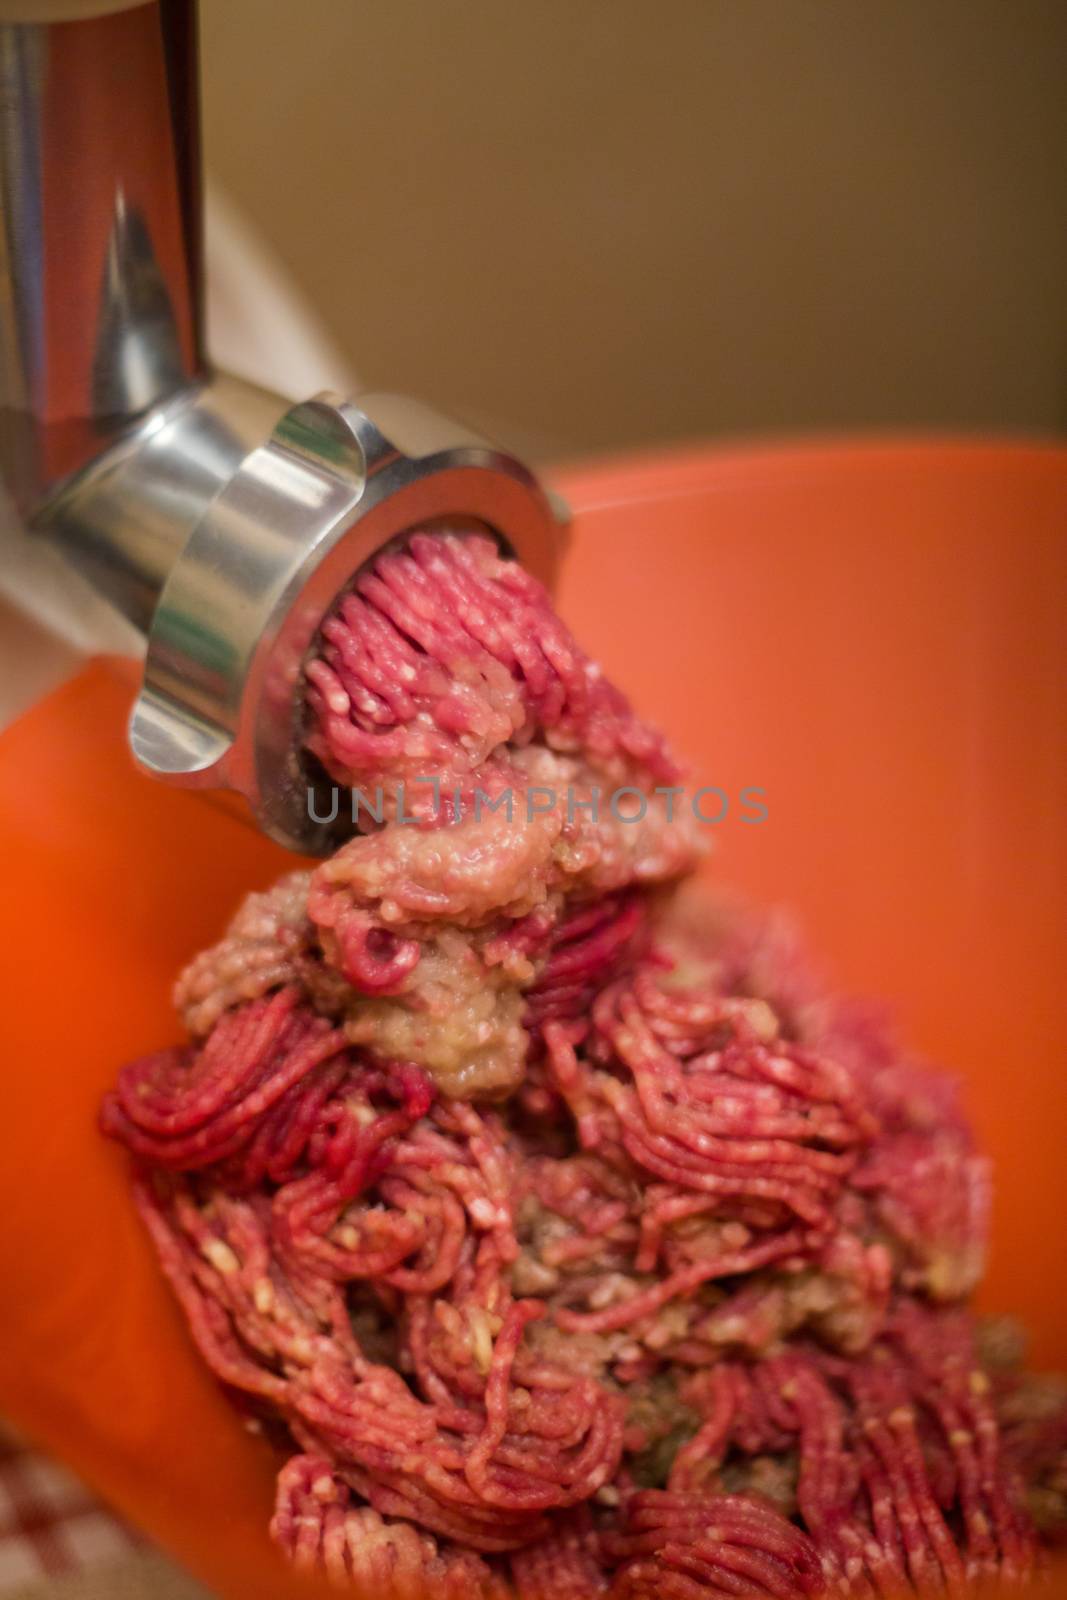 Close up of front part of meat grinder or mincing-machine with mince meat in. Showing the forcemeat process.